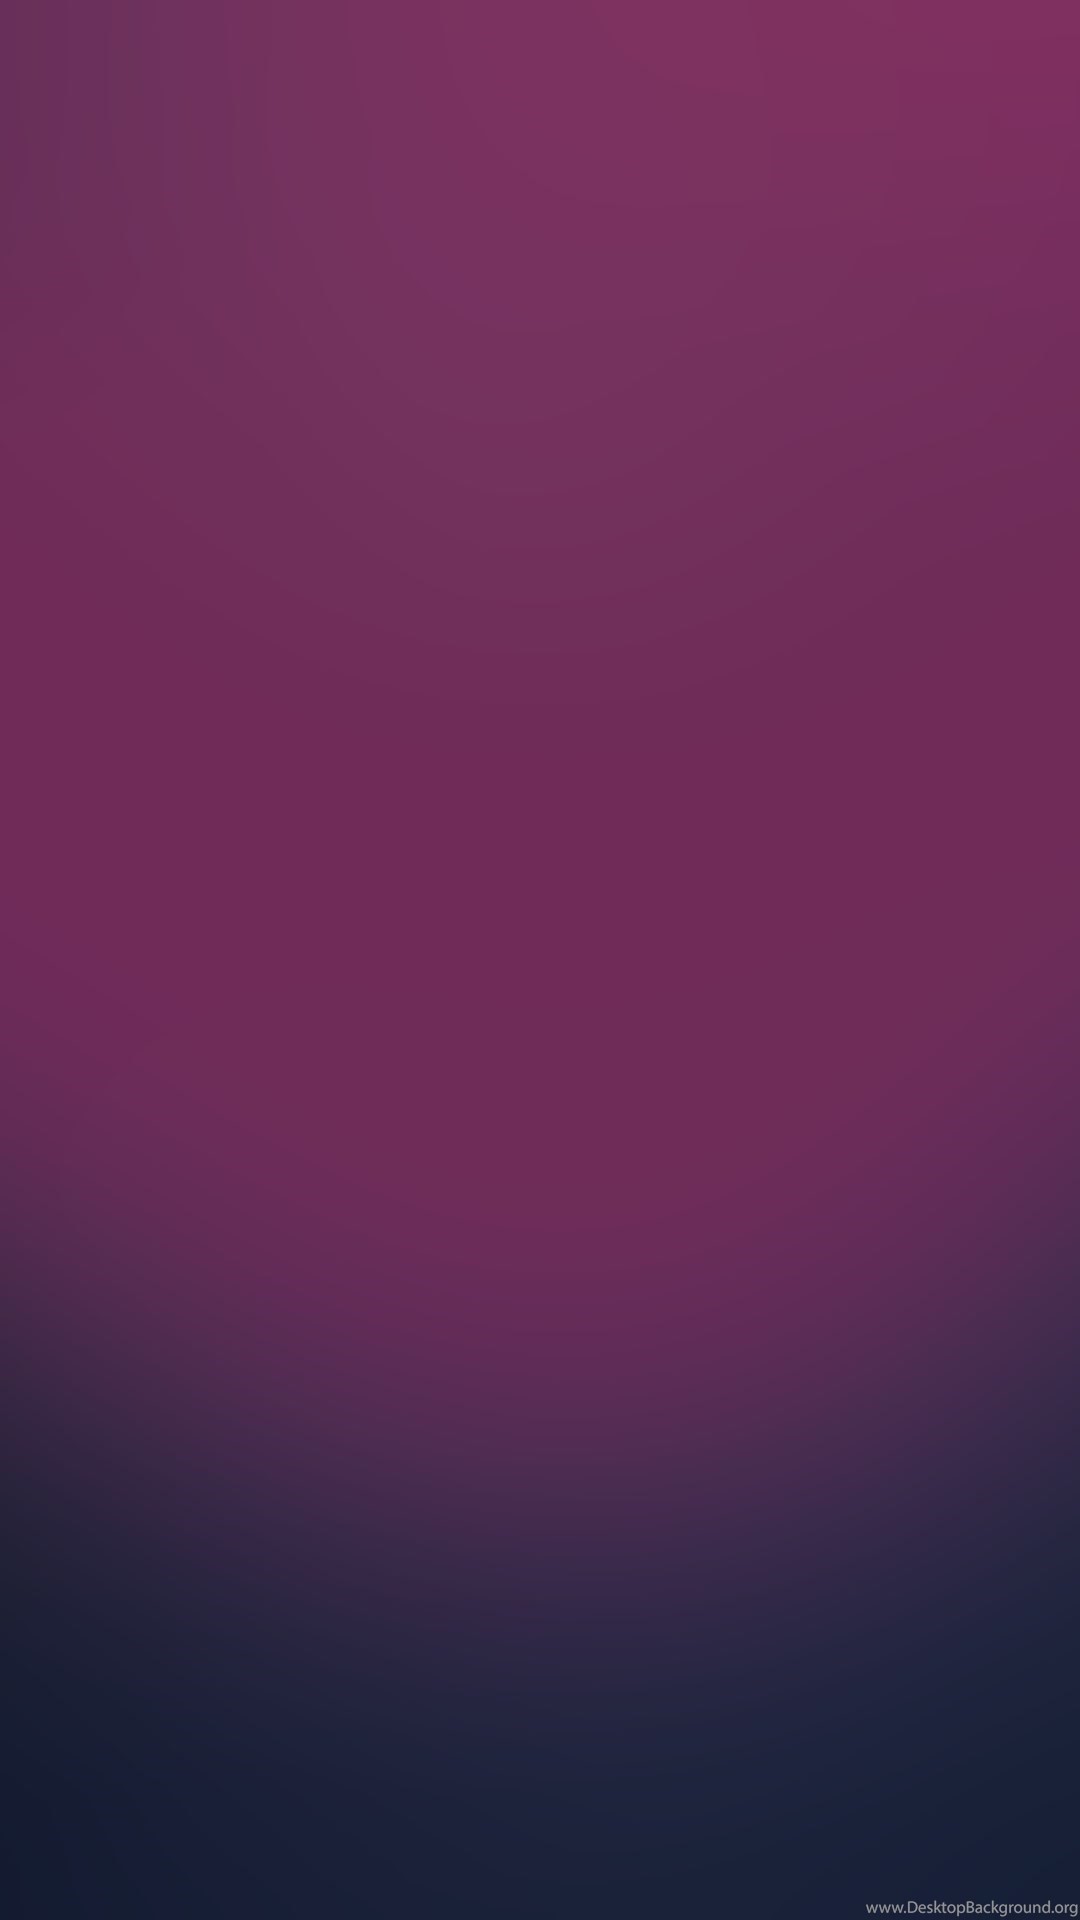 1080x1920 Simple Purple Gradient Samsung Android Wallpapers Free Download Desktop  Background